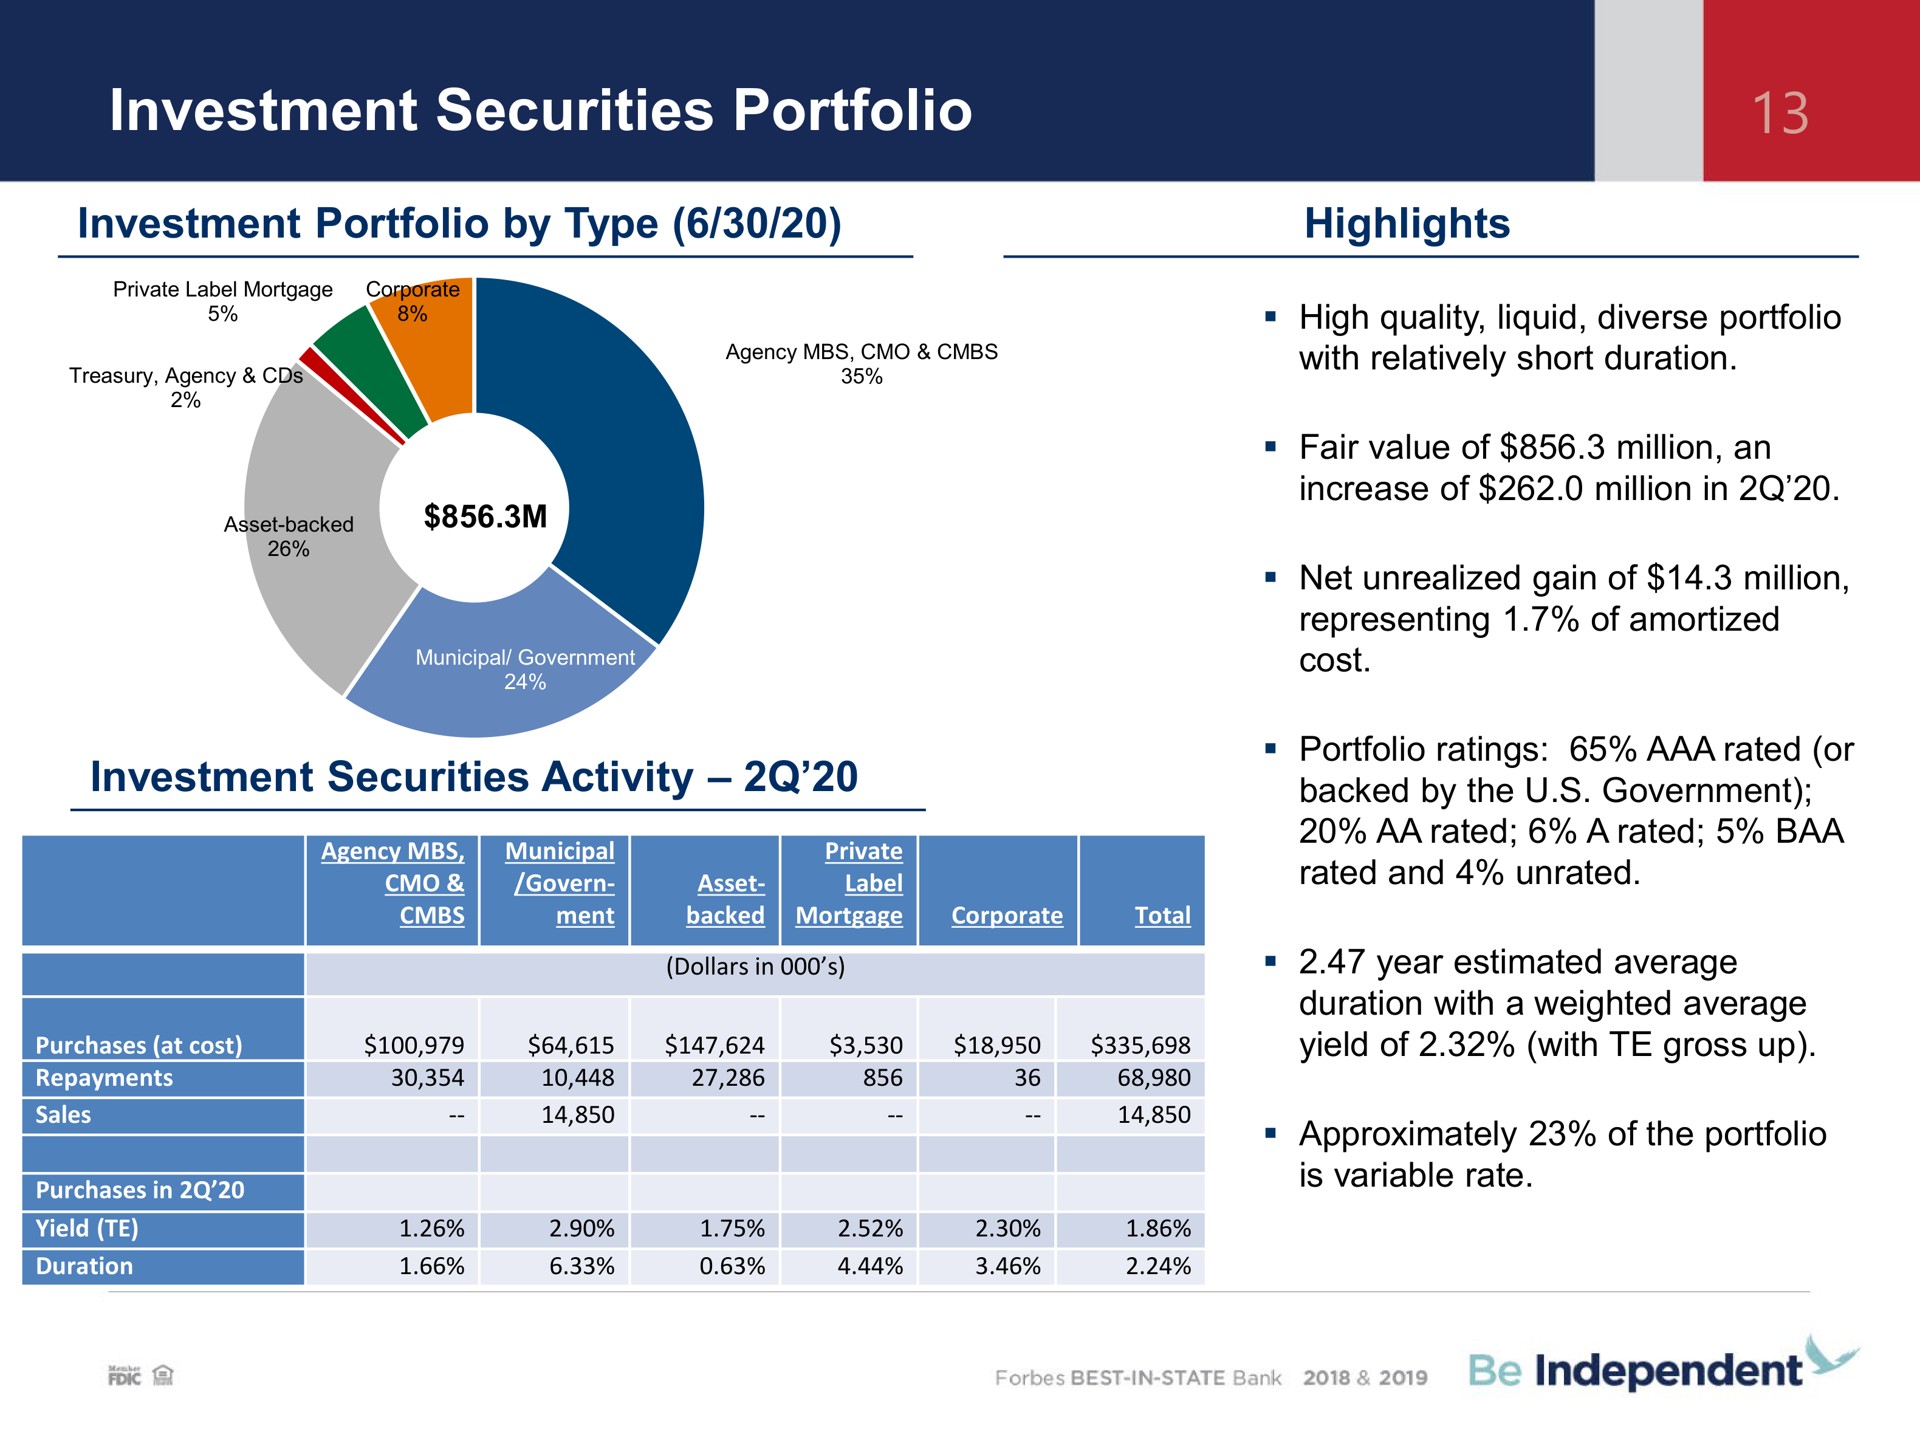 investment securities portfolio investment portfolio by type highlights investment securities activity backed he us government | Independent Bank Corp